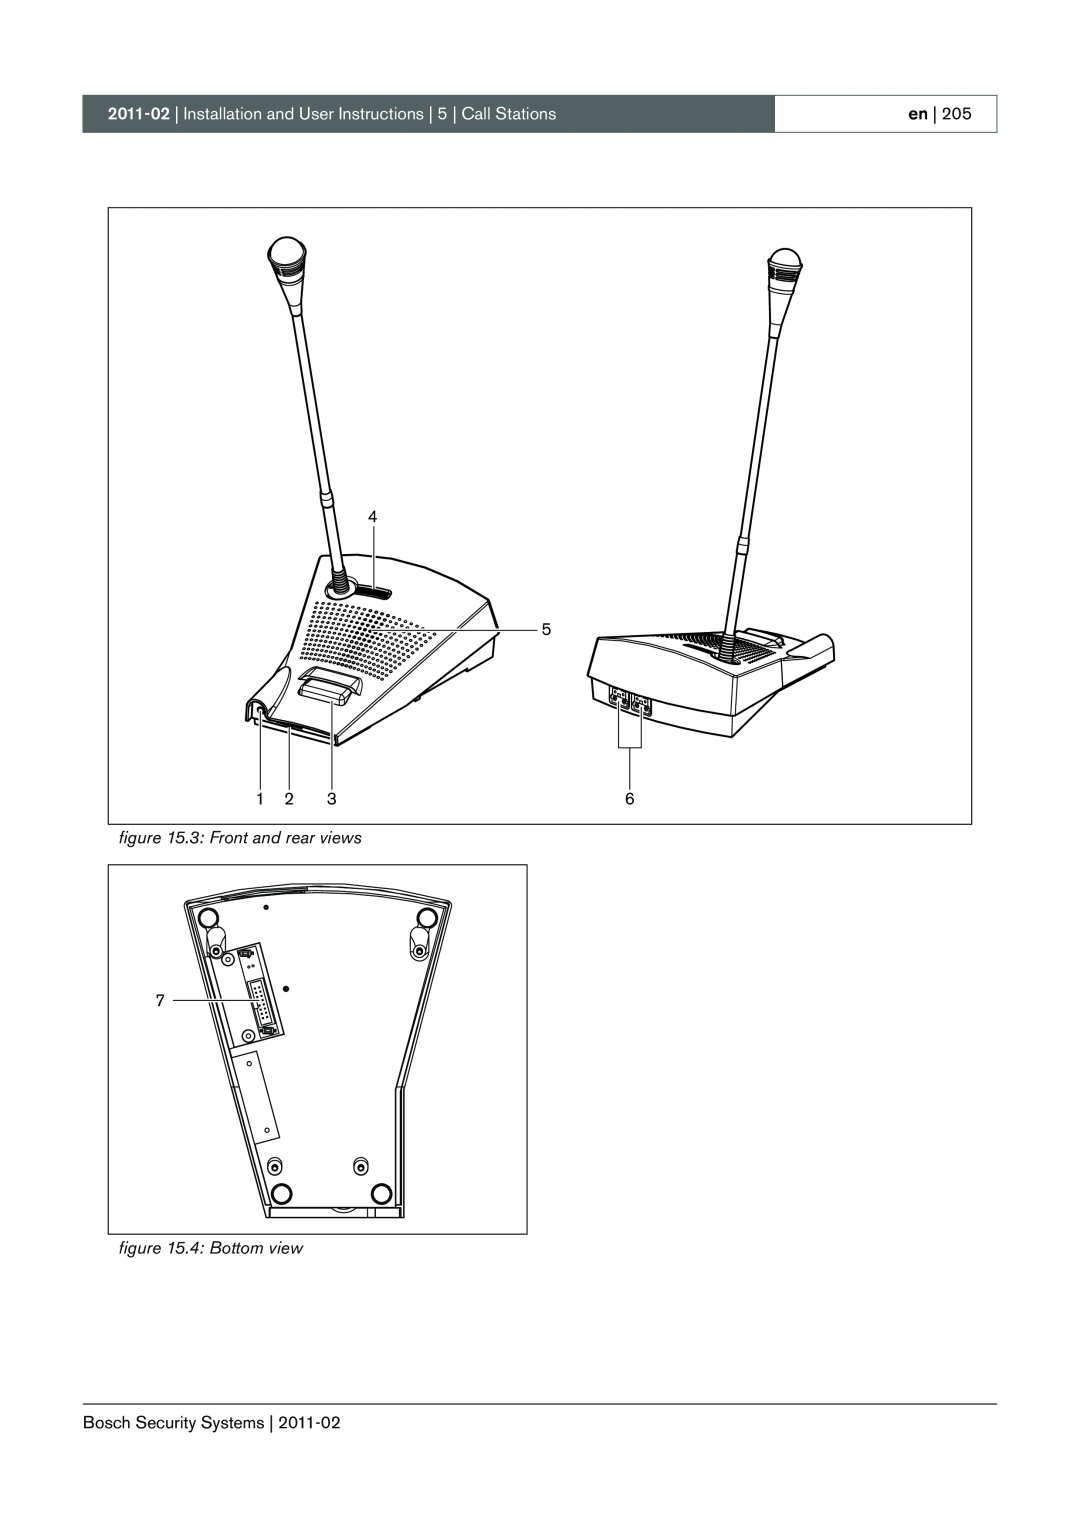 Bosch Appliances 3.5 manual 3: Front and rear views, 4: Bottom view 